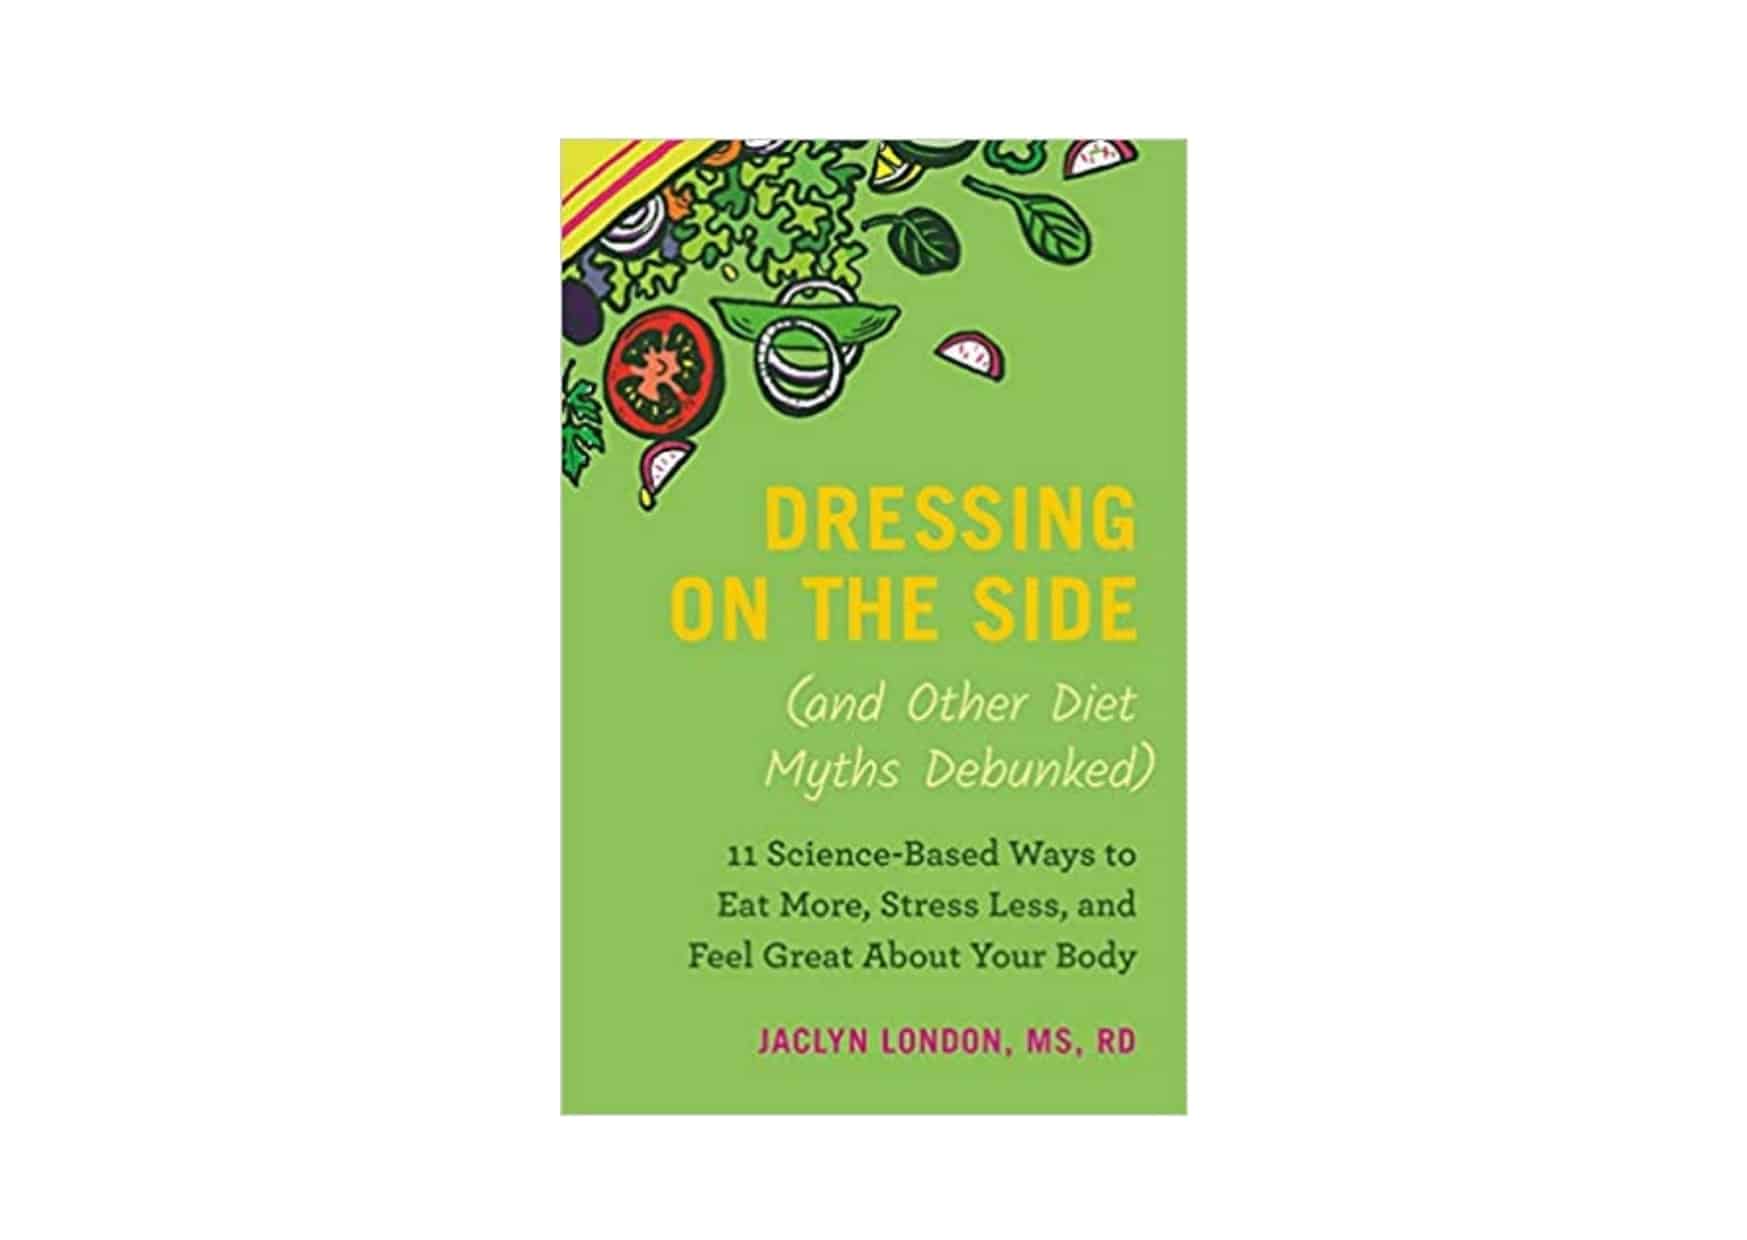 10 Books On Health That Increase Your Eating And Body Awareness